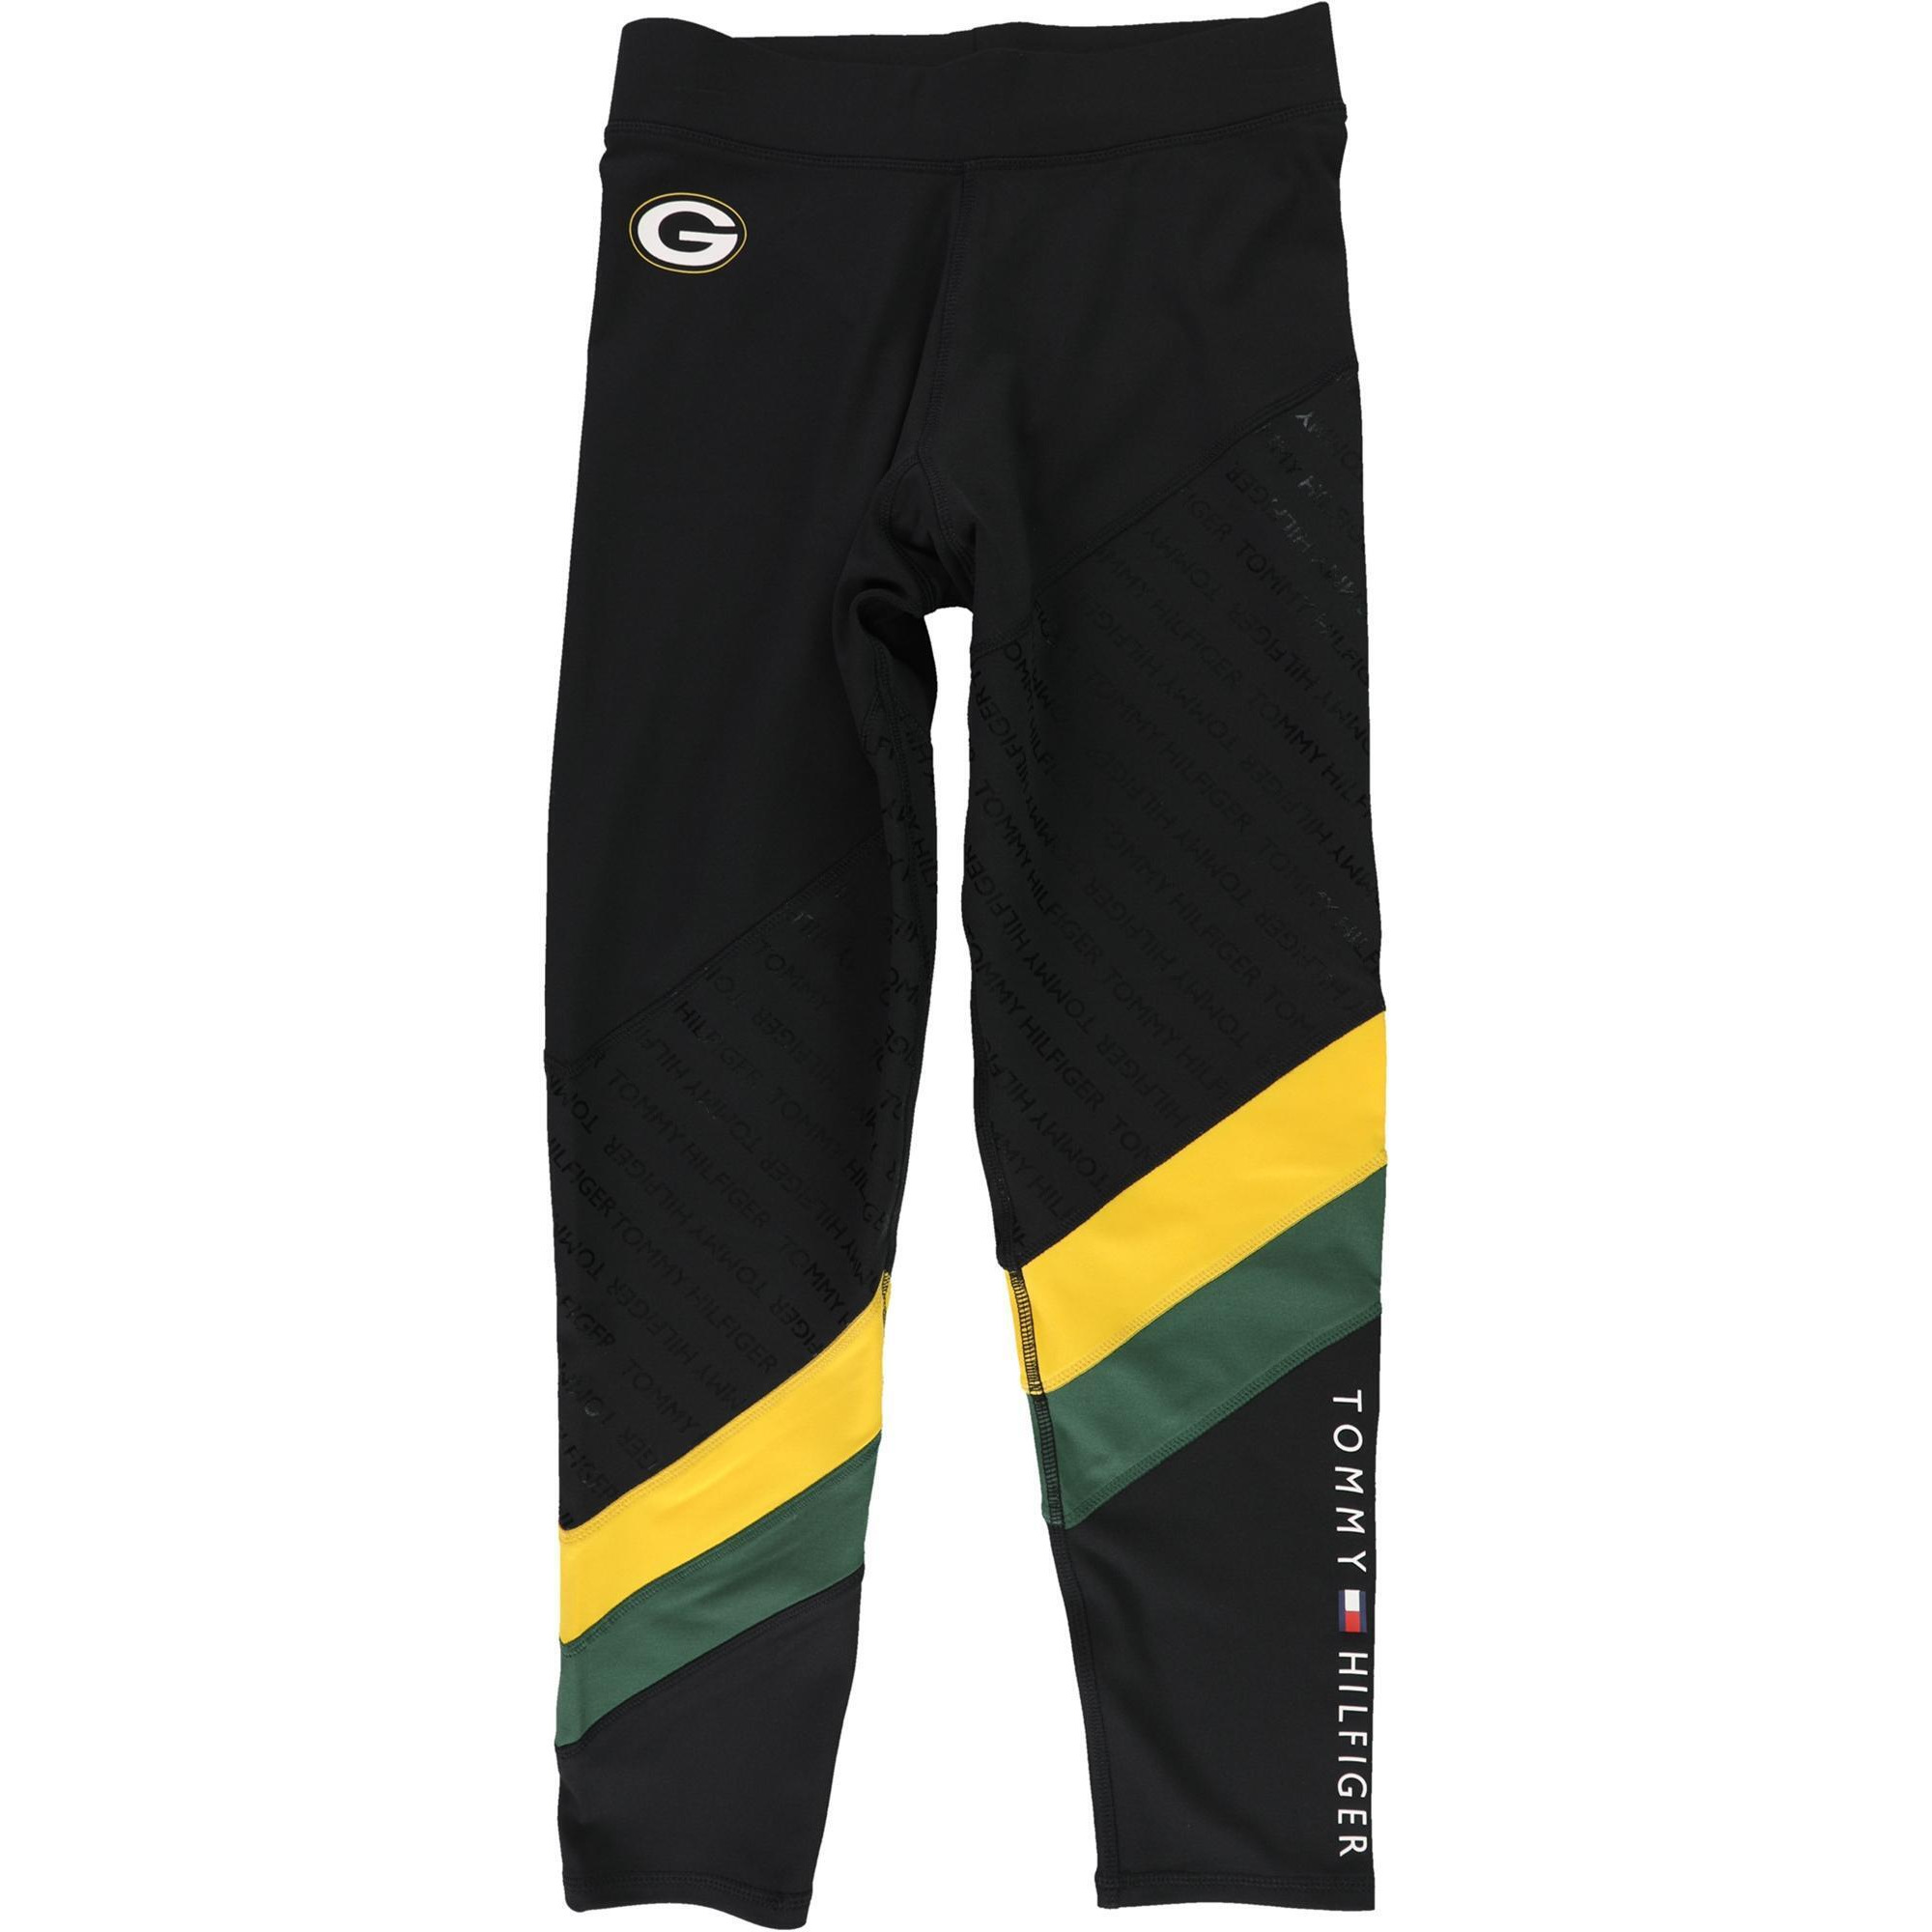 Tommy Hilfiger Womens Green Bay Packers Compression Athletic Pants, Style # 6U00Z056